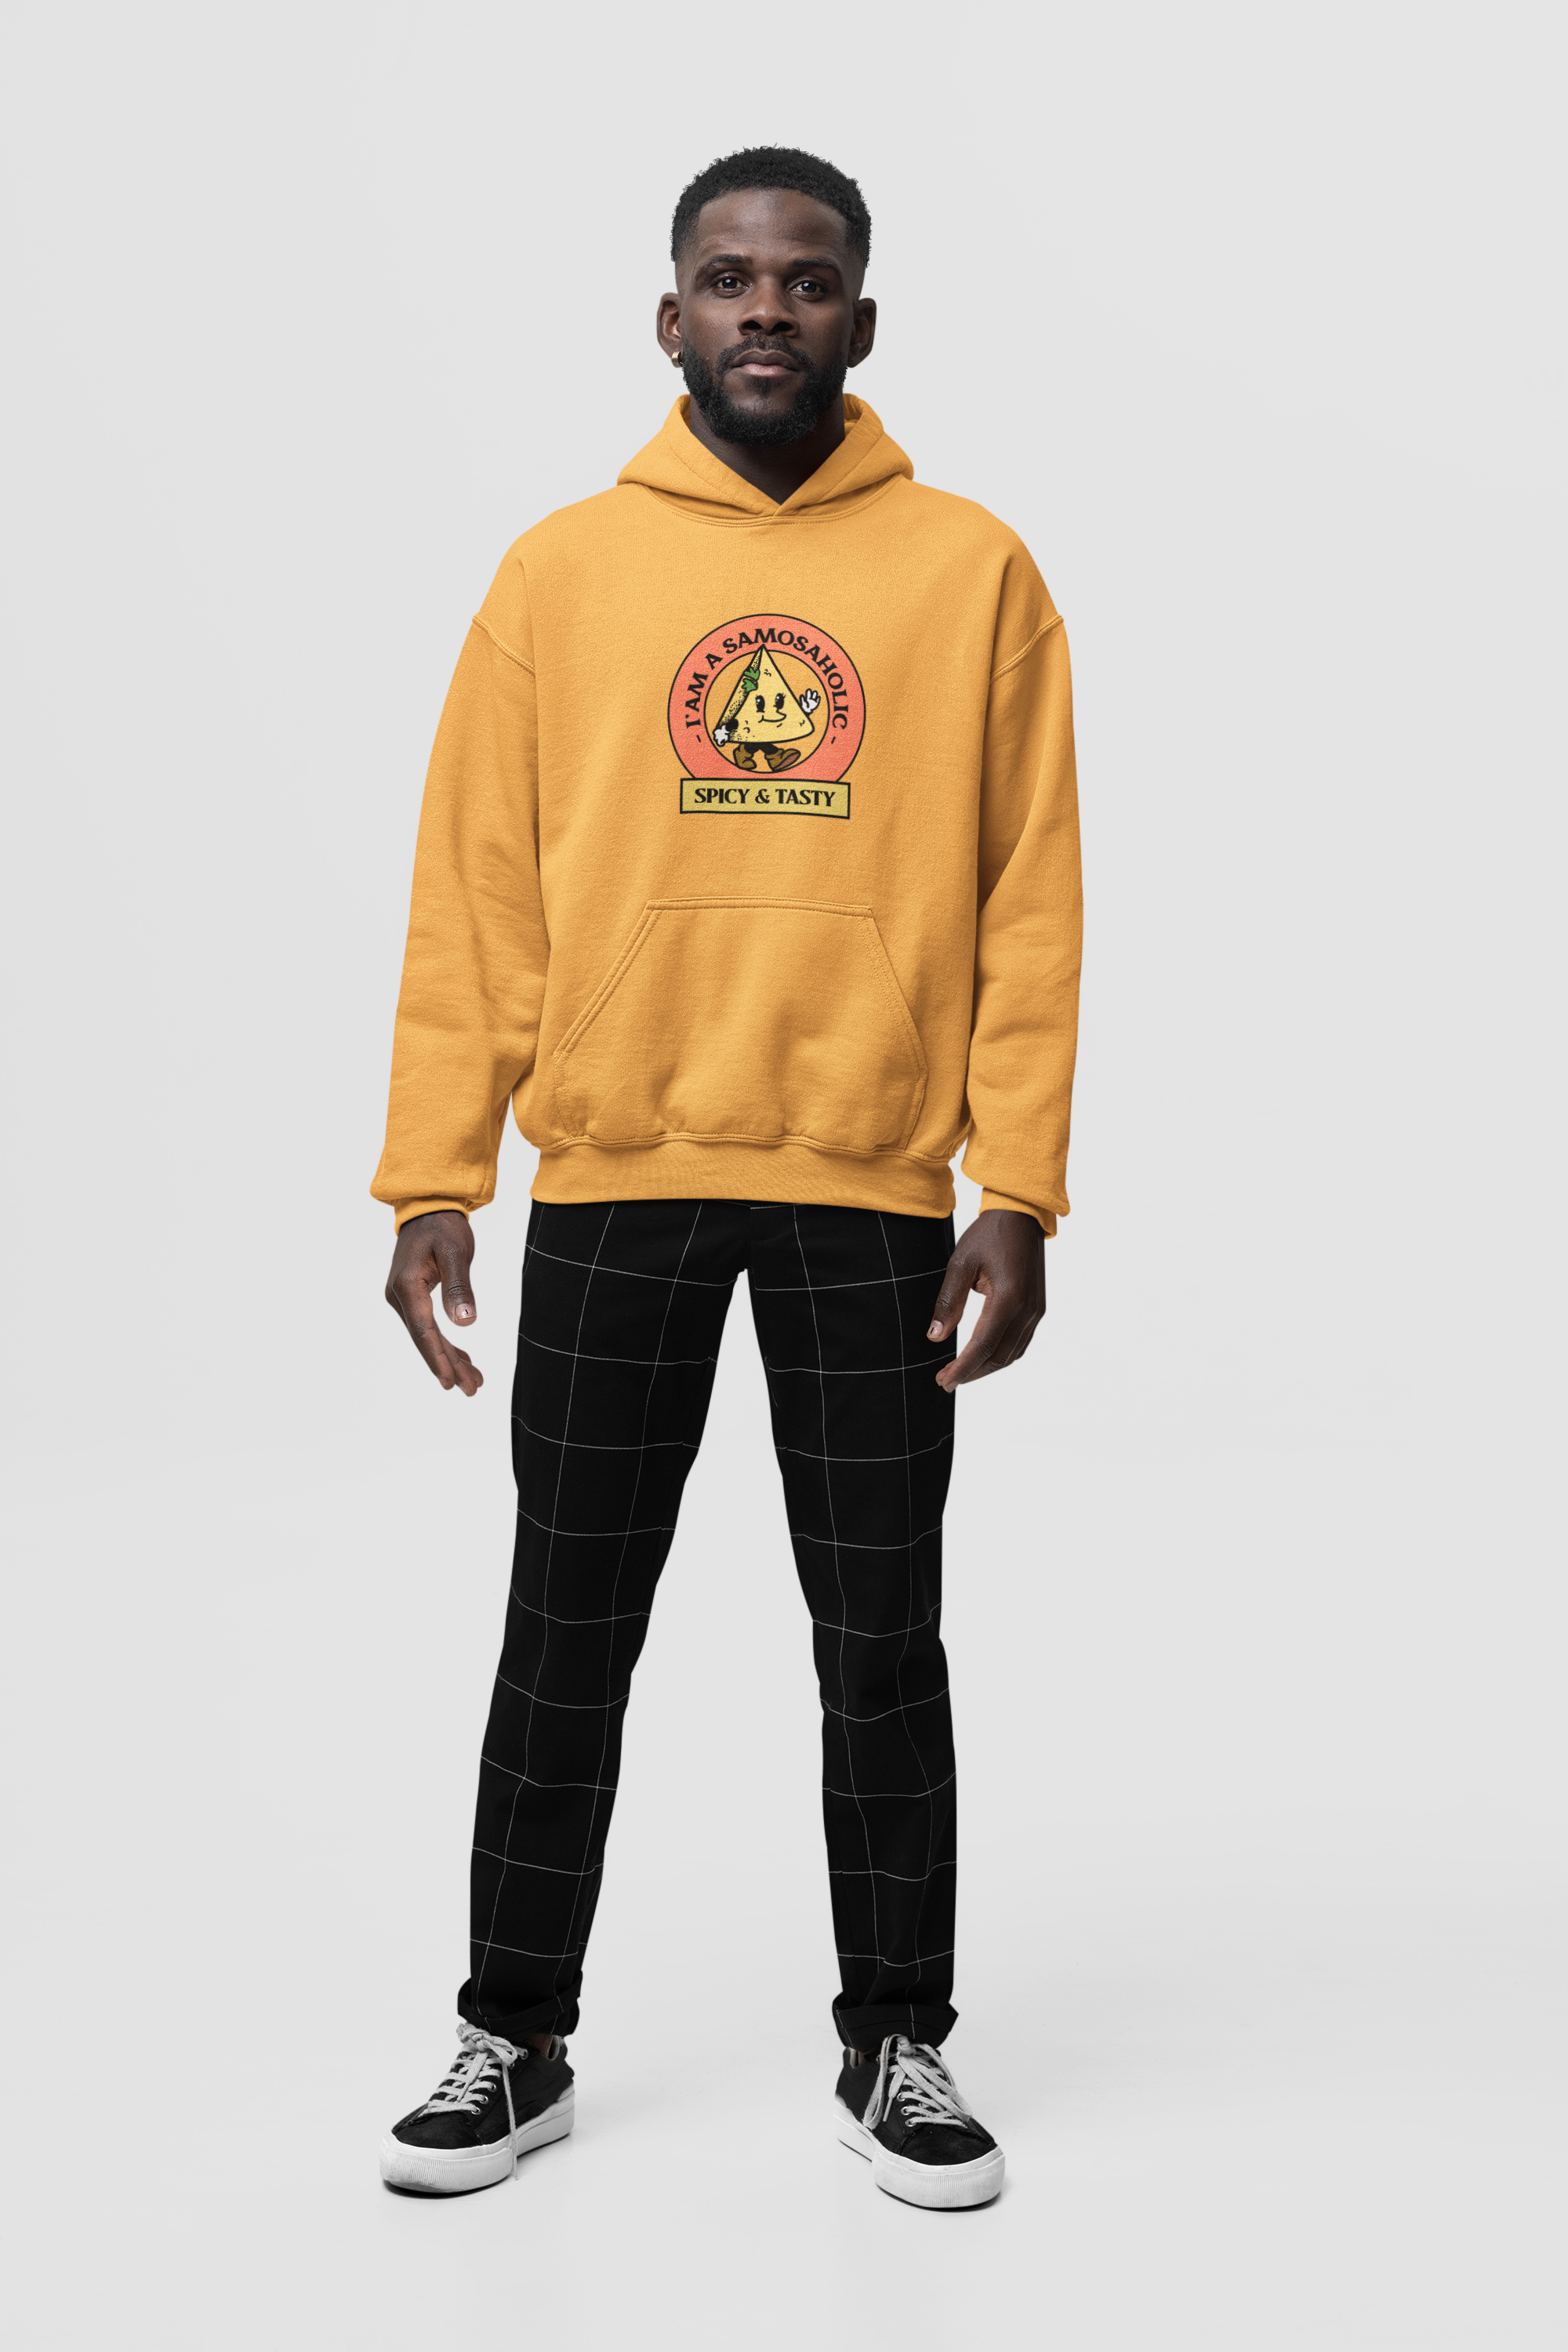 HOODIE MUSTARD YELLOW: SPICY AND TASTY